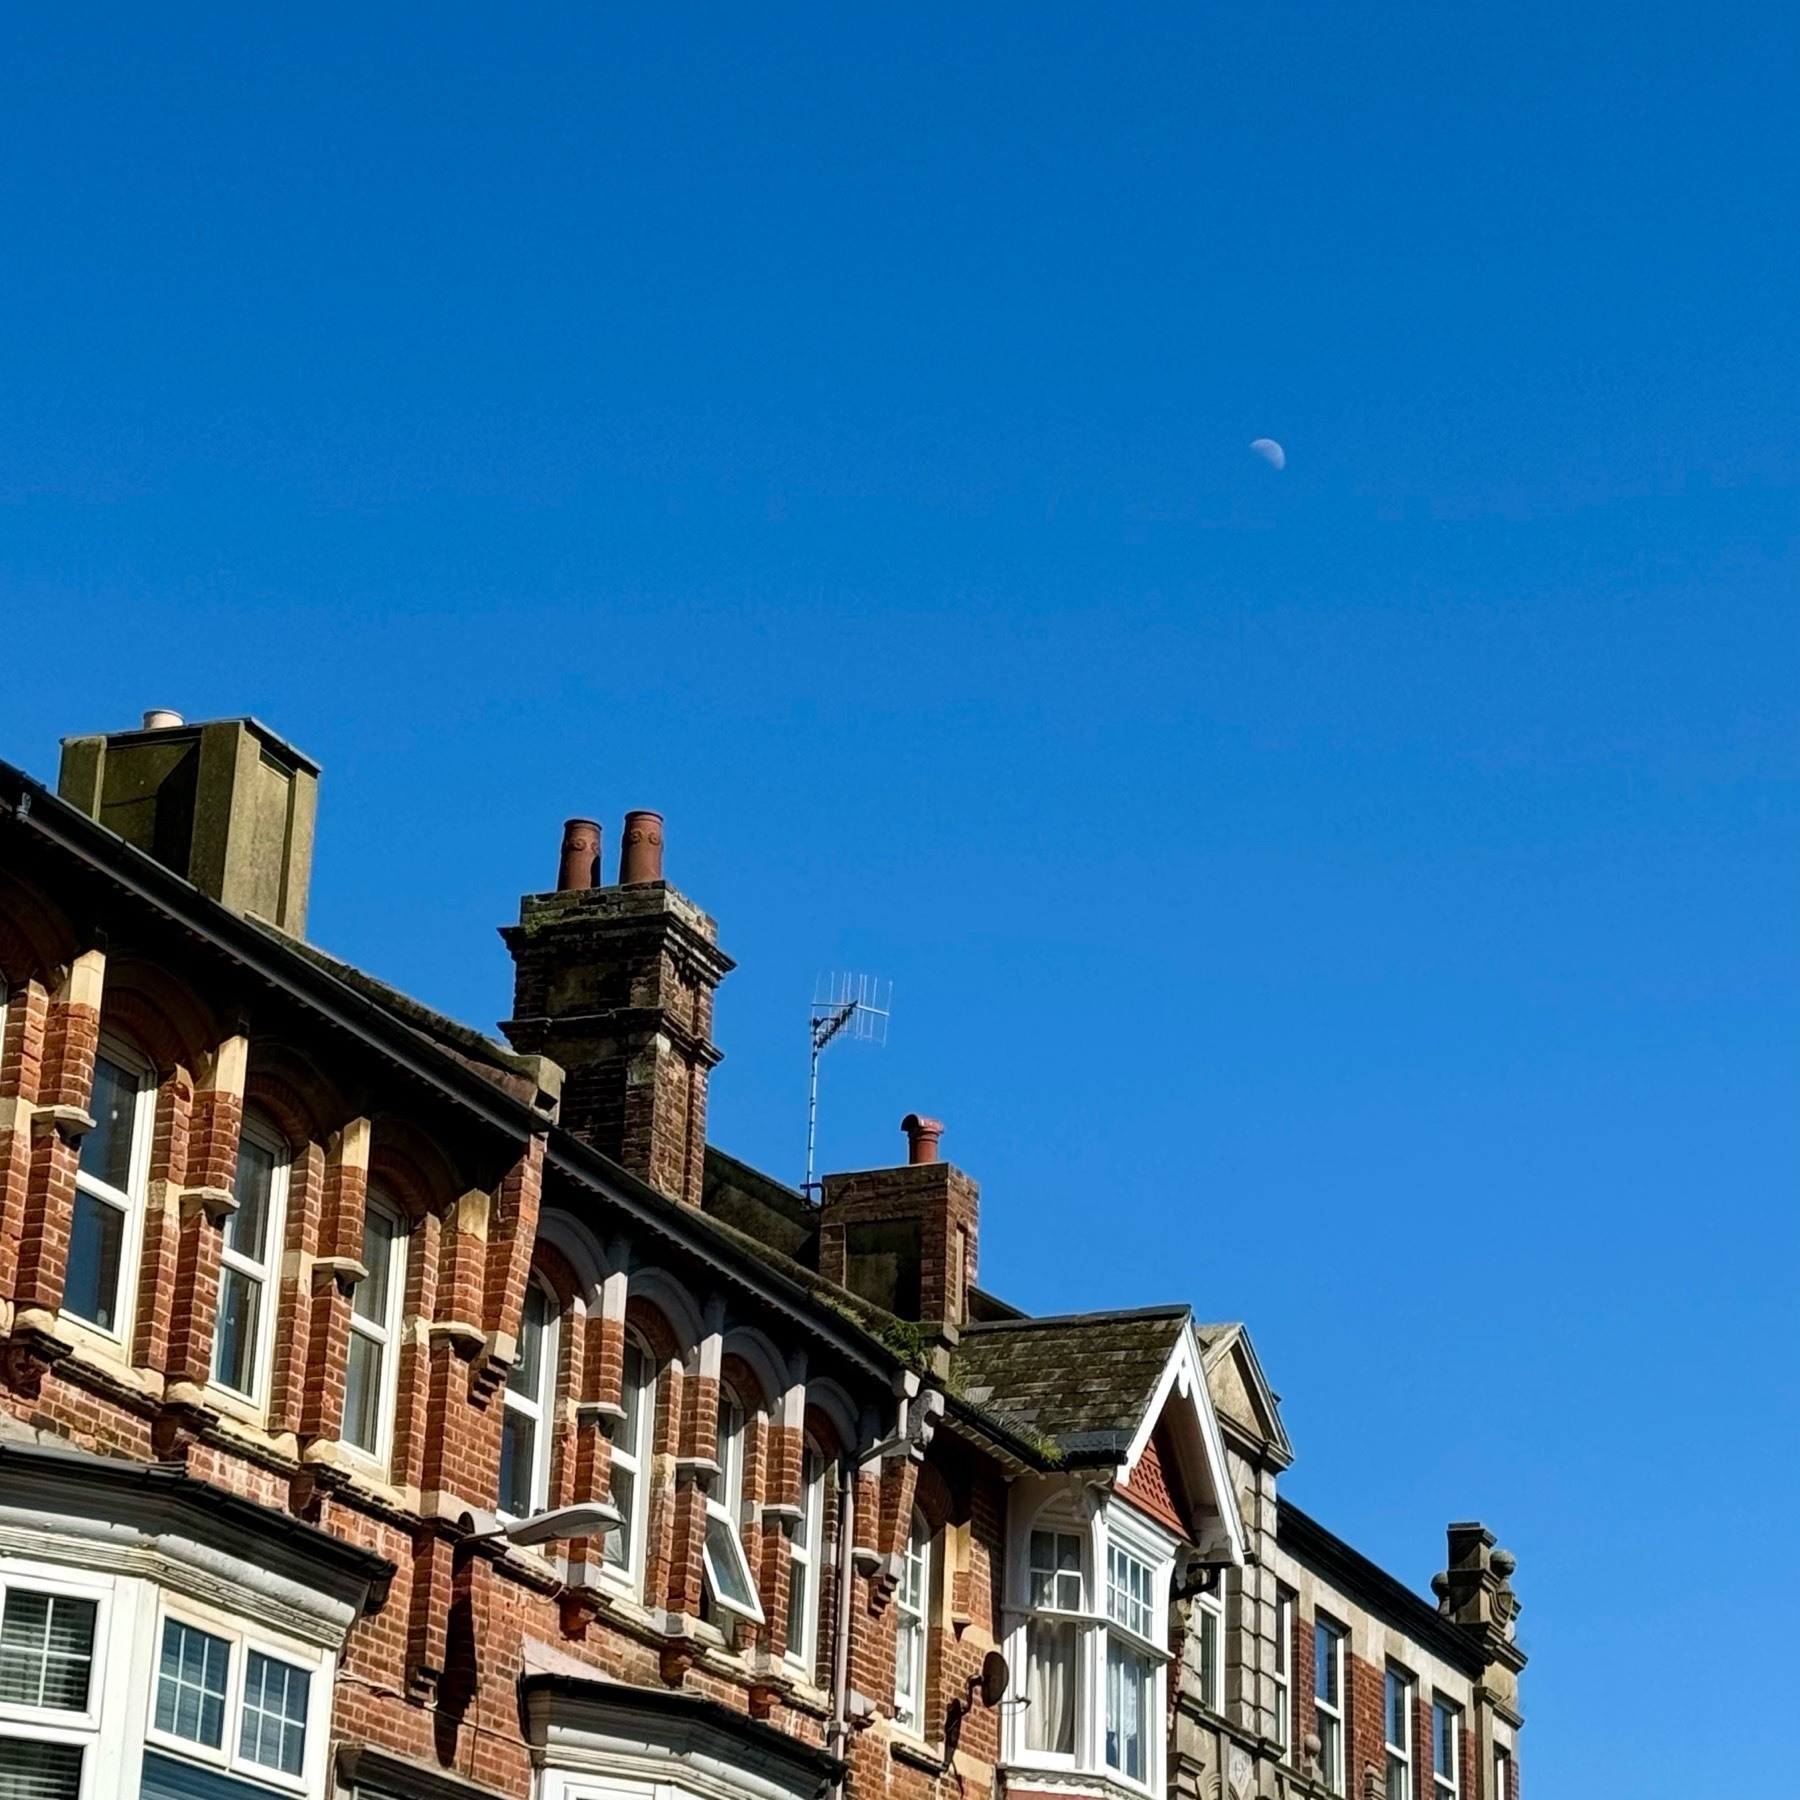 The slight "smiling" moon during the daytime, in a deep blue sky over brick townhouses